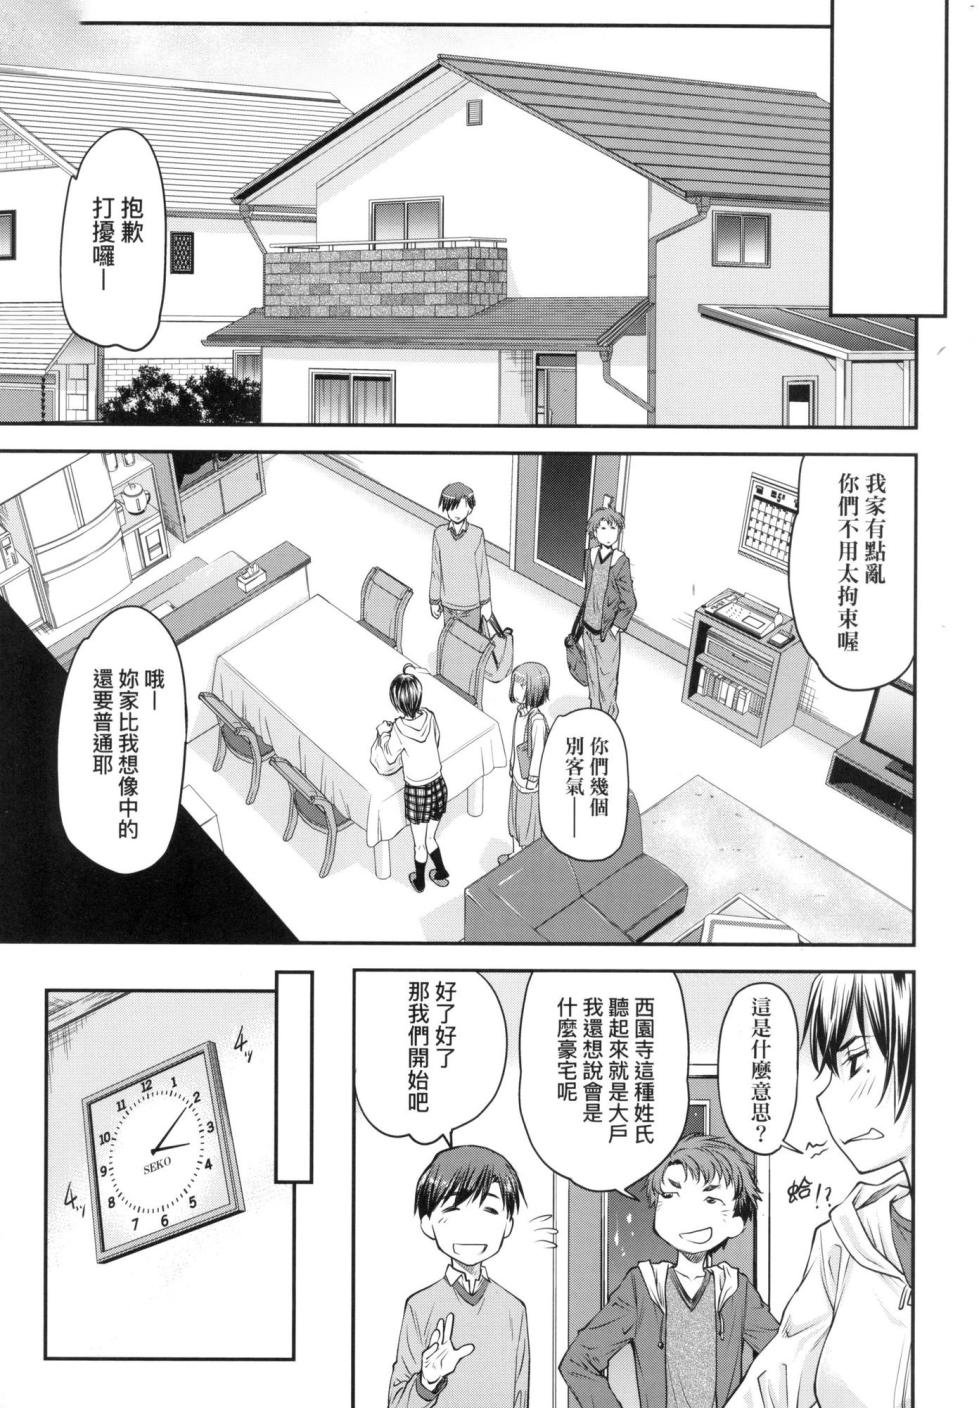 [Nagare Ippon] Kaname Date Jou | 小要開發Date 上 [Chinese] [Decensored] - Page 13